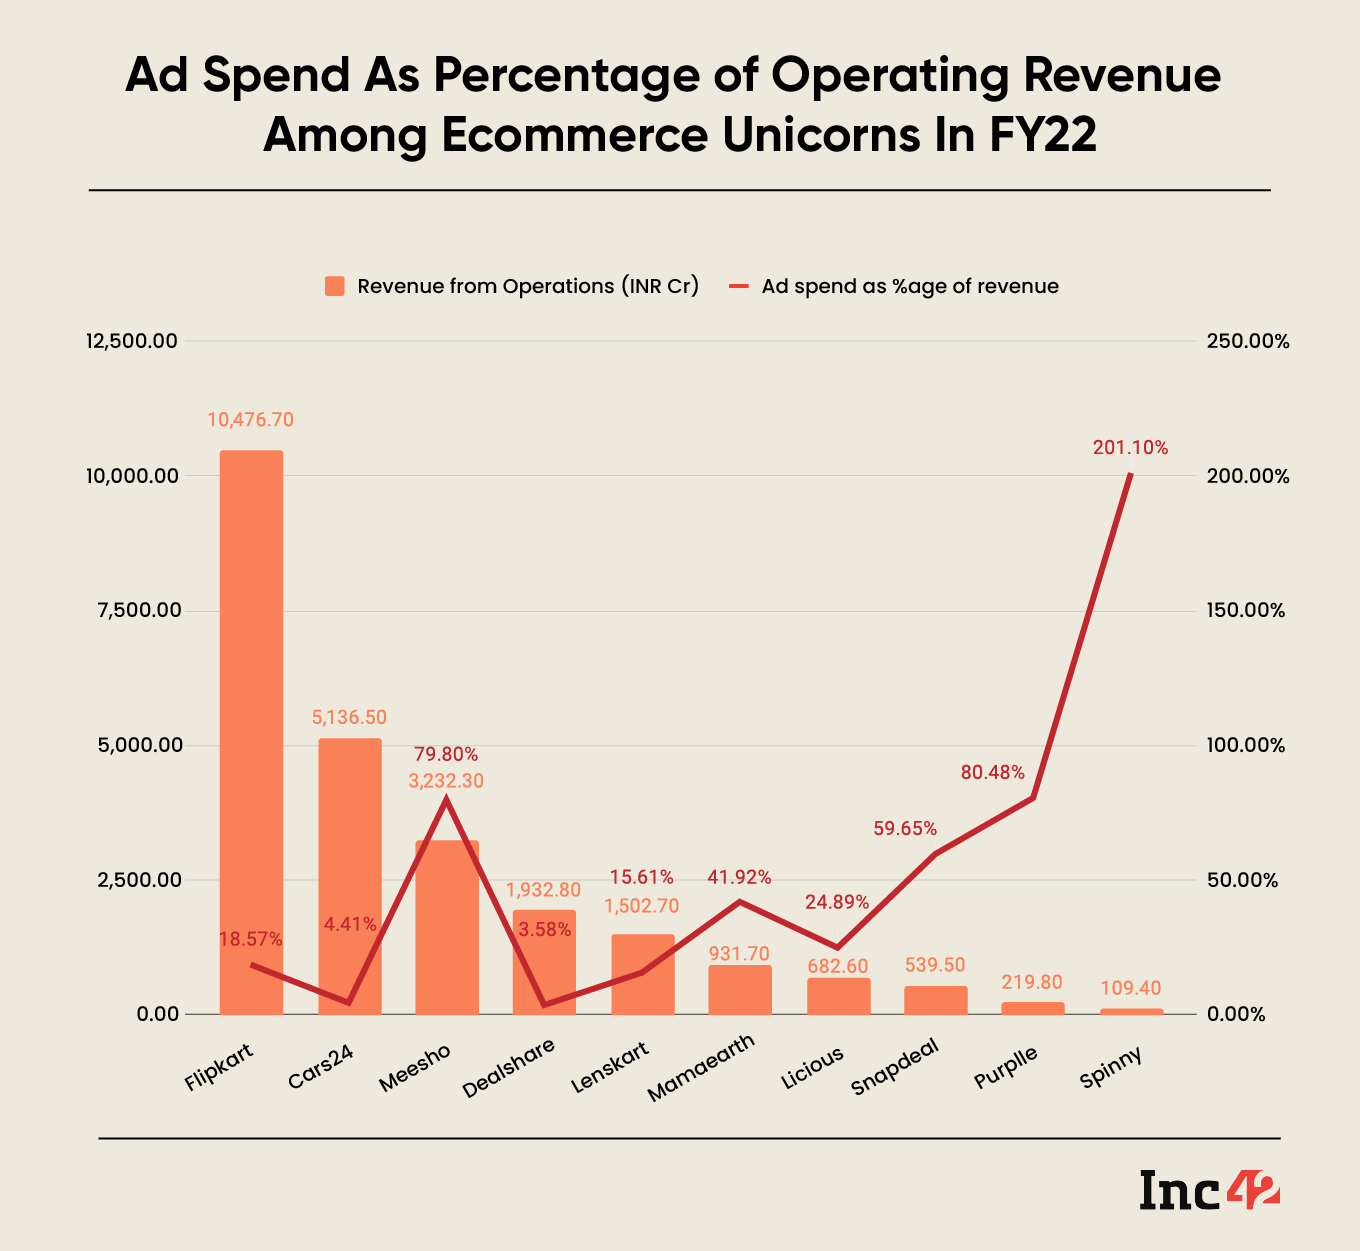 Ecommerce unicorns marketing spending compared to revenue from operations